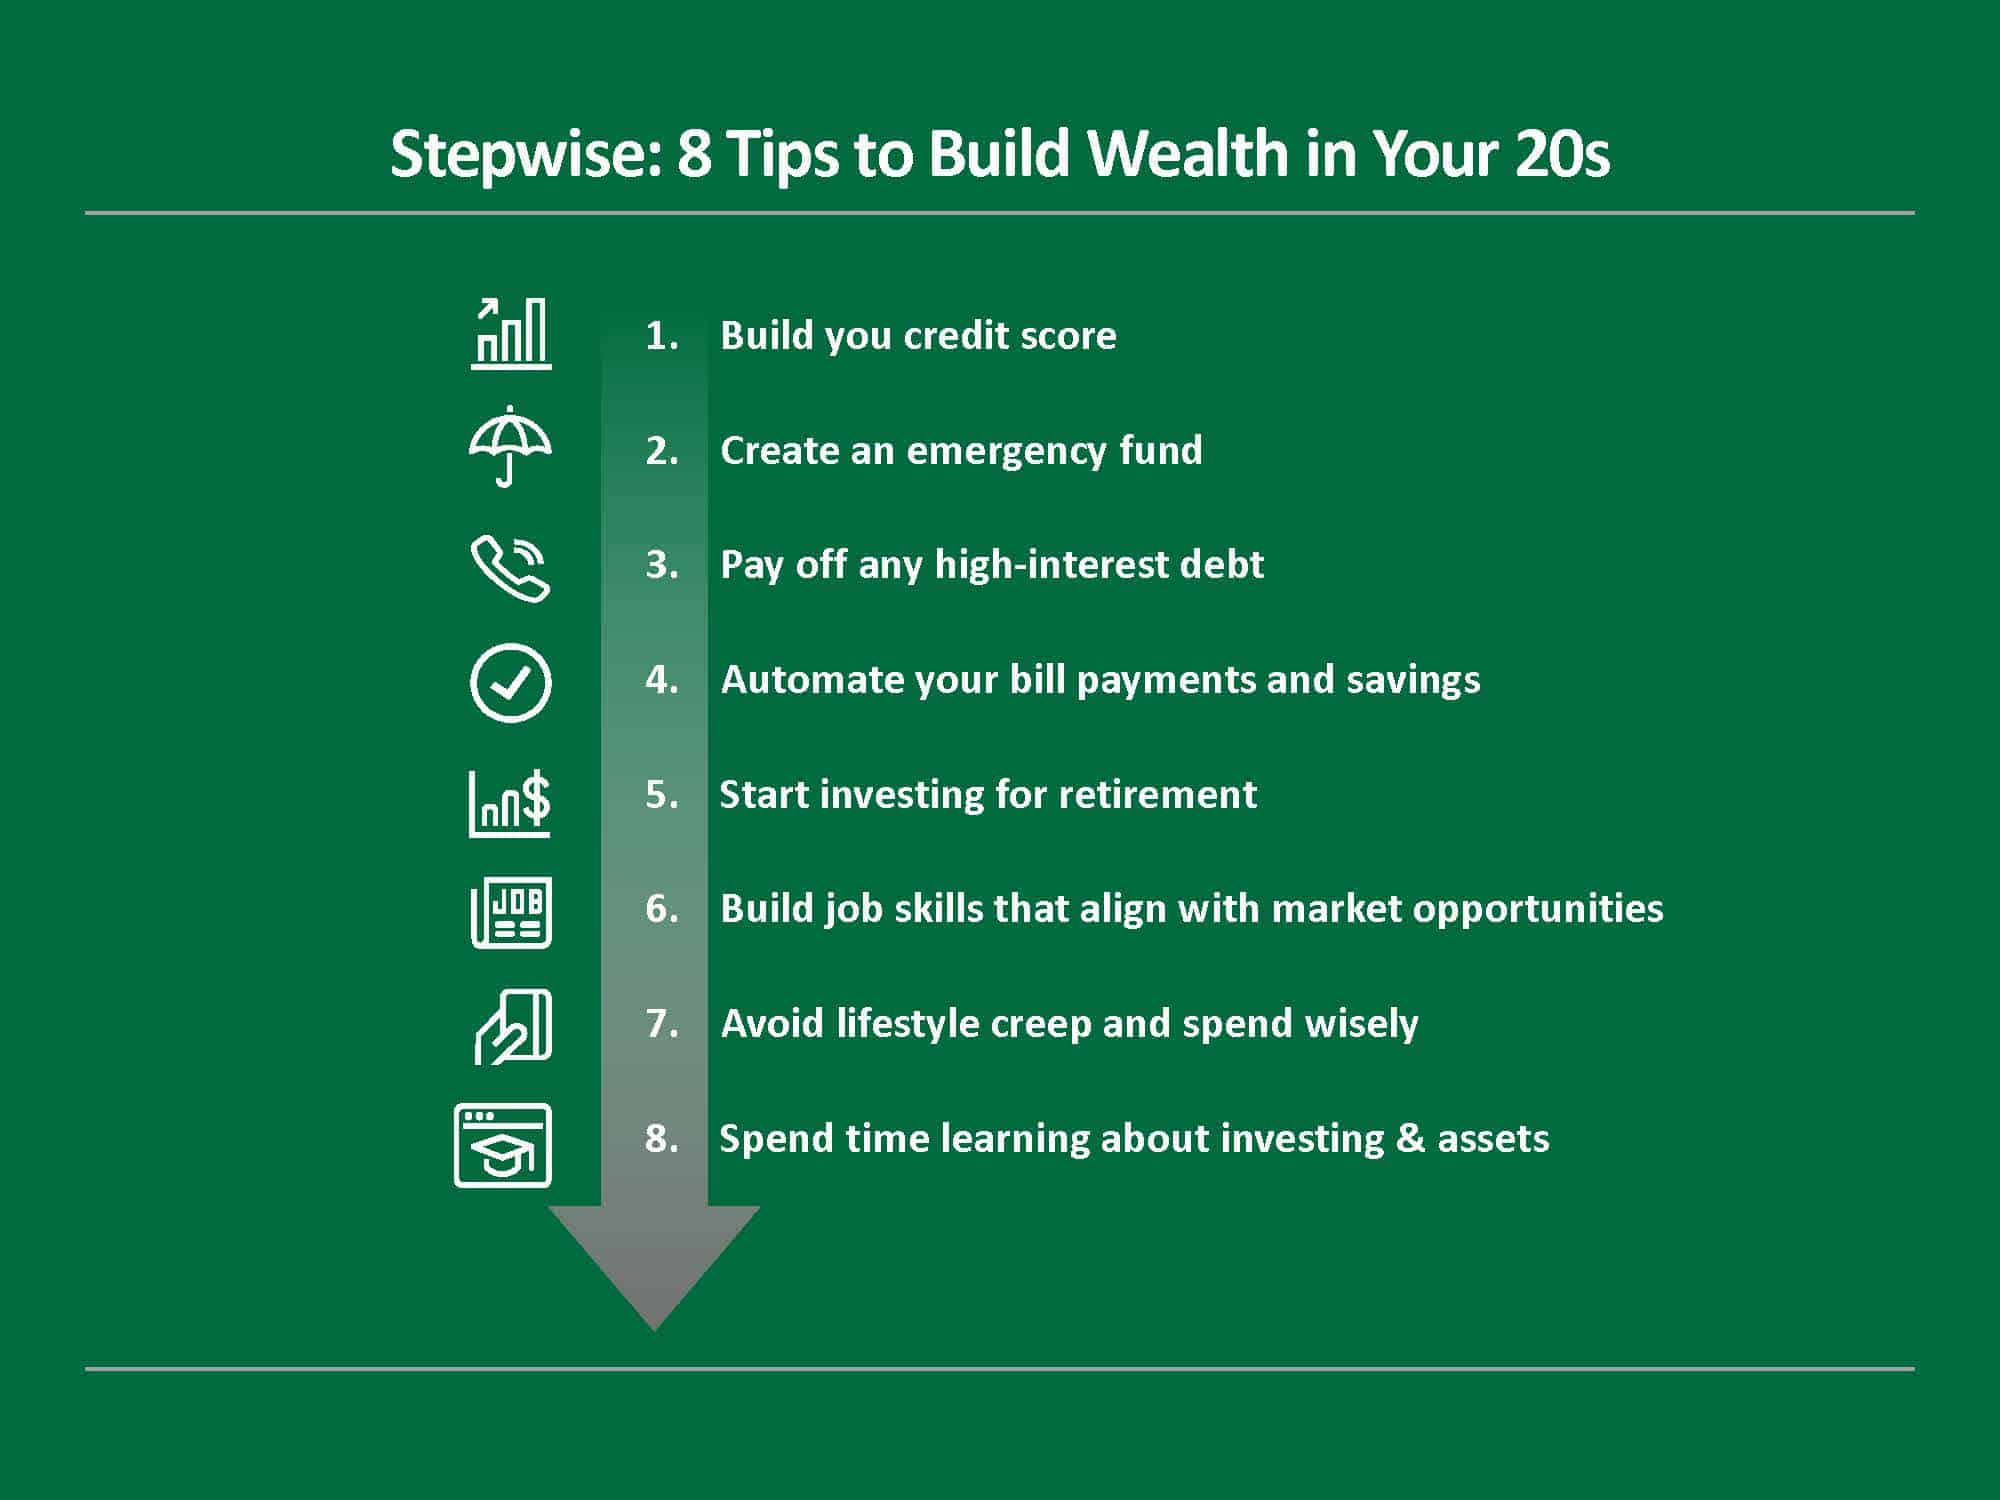 How to Build Wealth in Your 20s